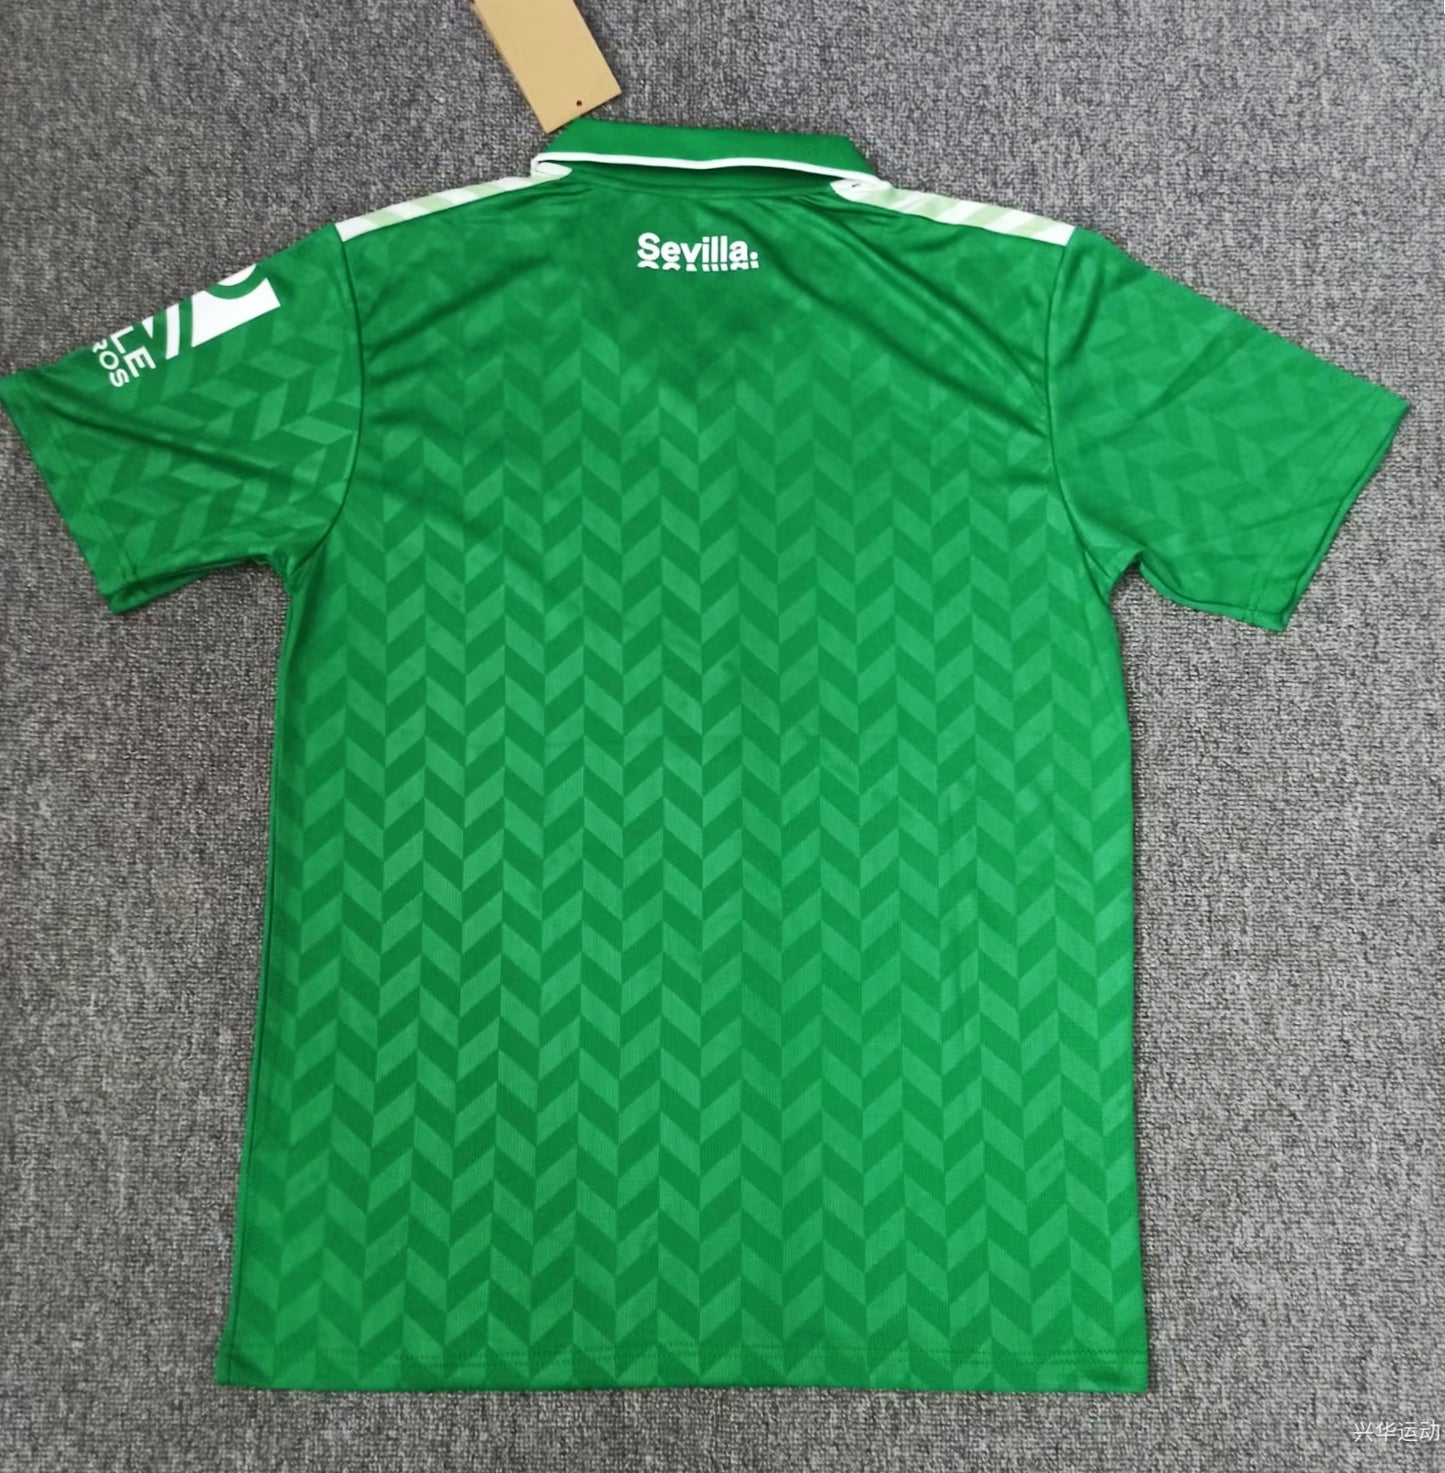 Real Betis New Vintage Away Jersey